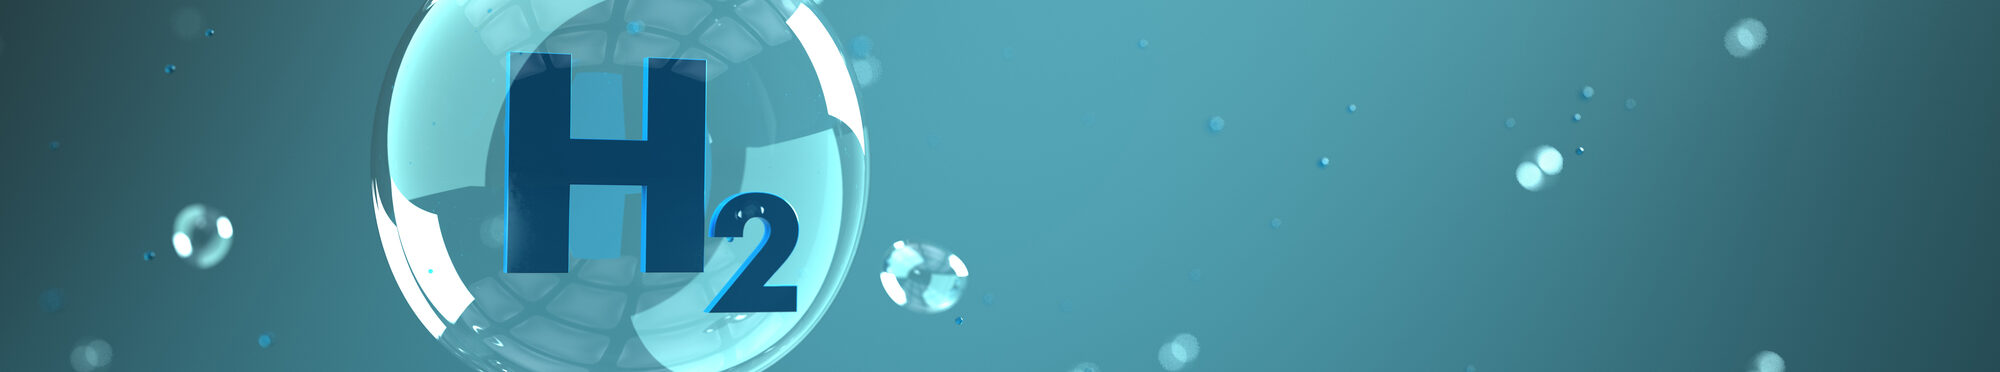 H2 hydrogen bubbles on the cyan background. 3d illustration.